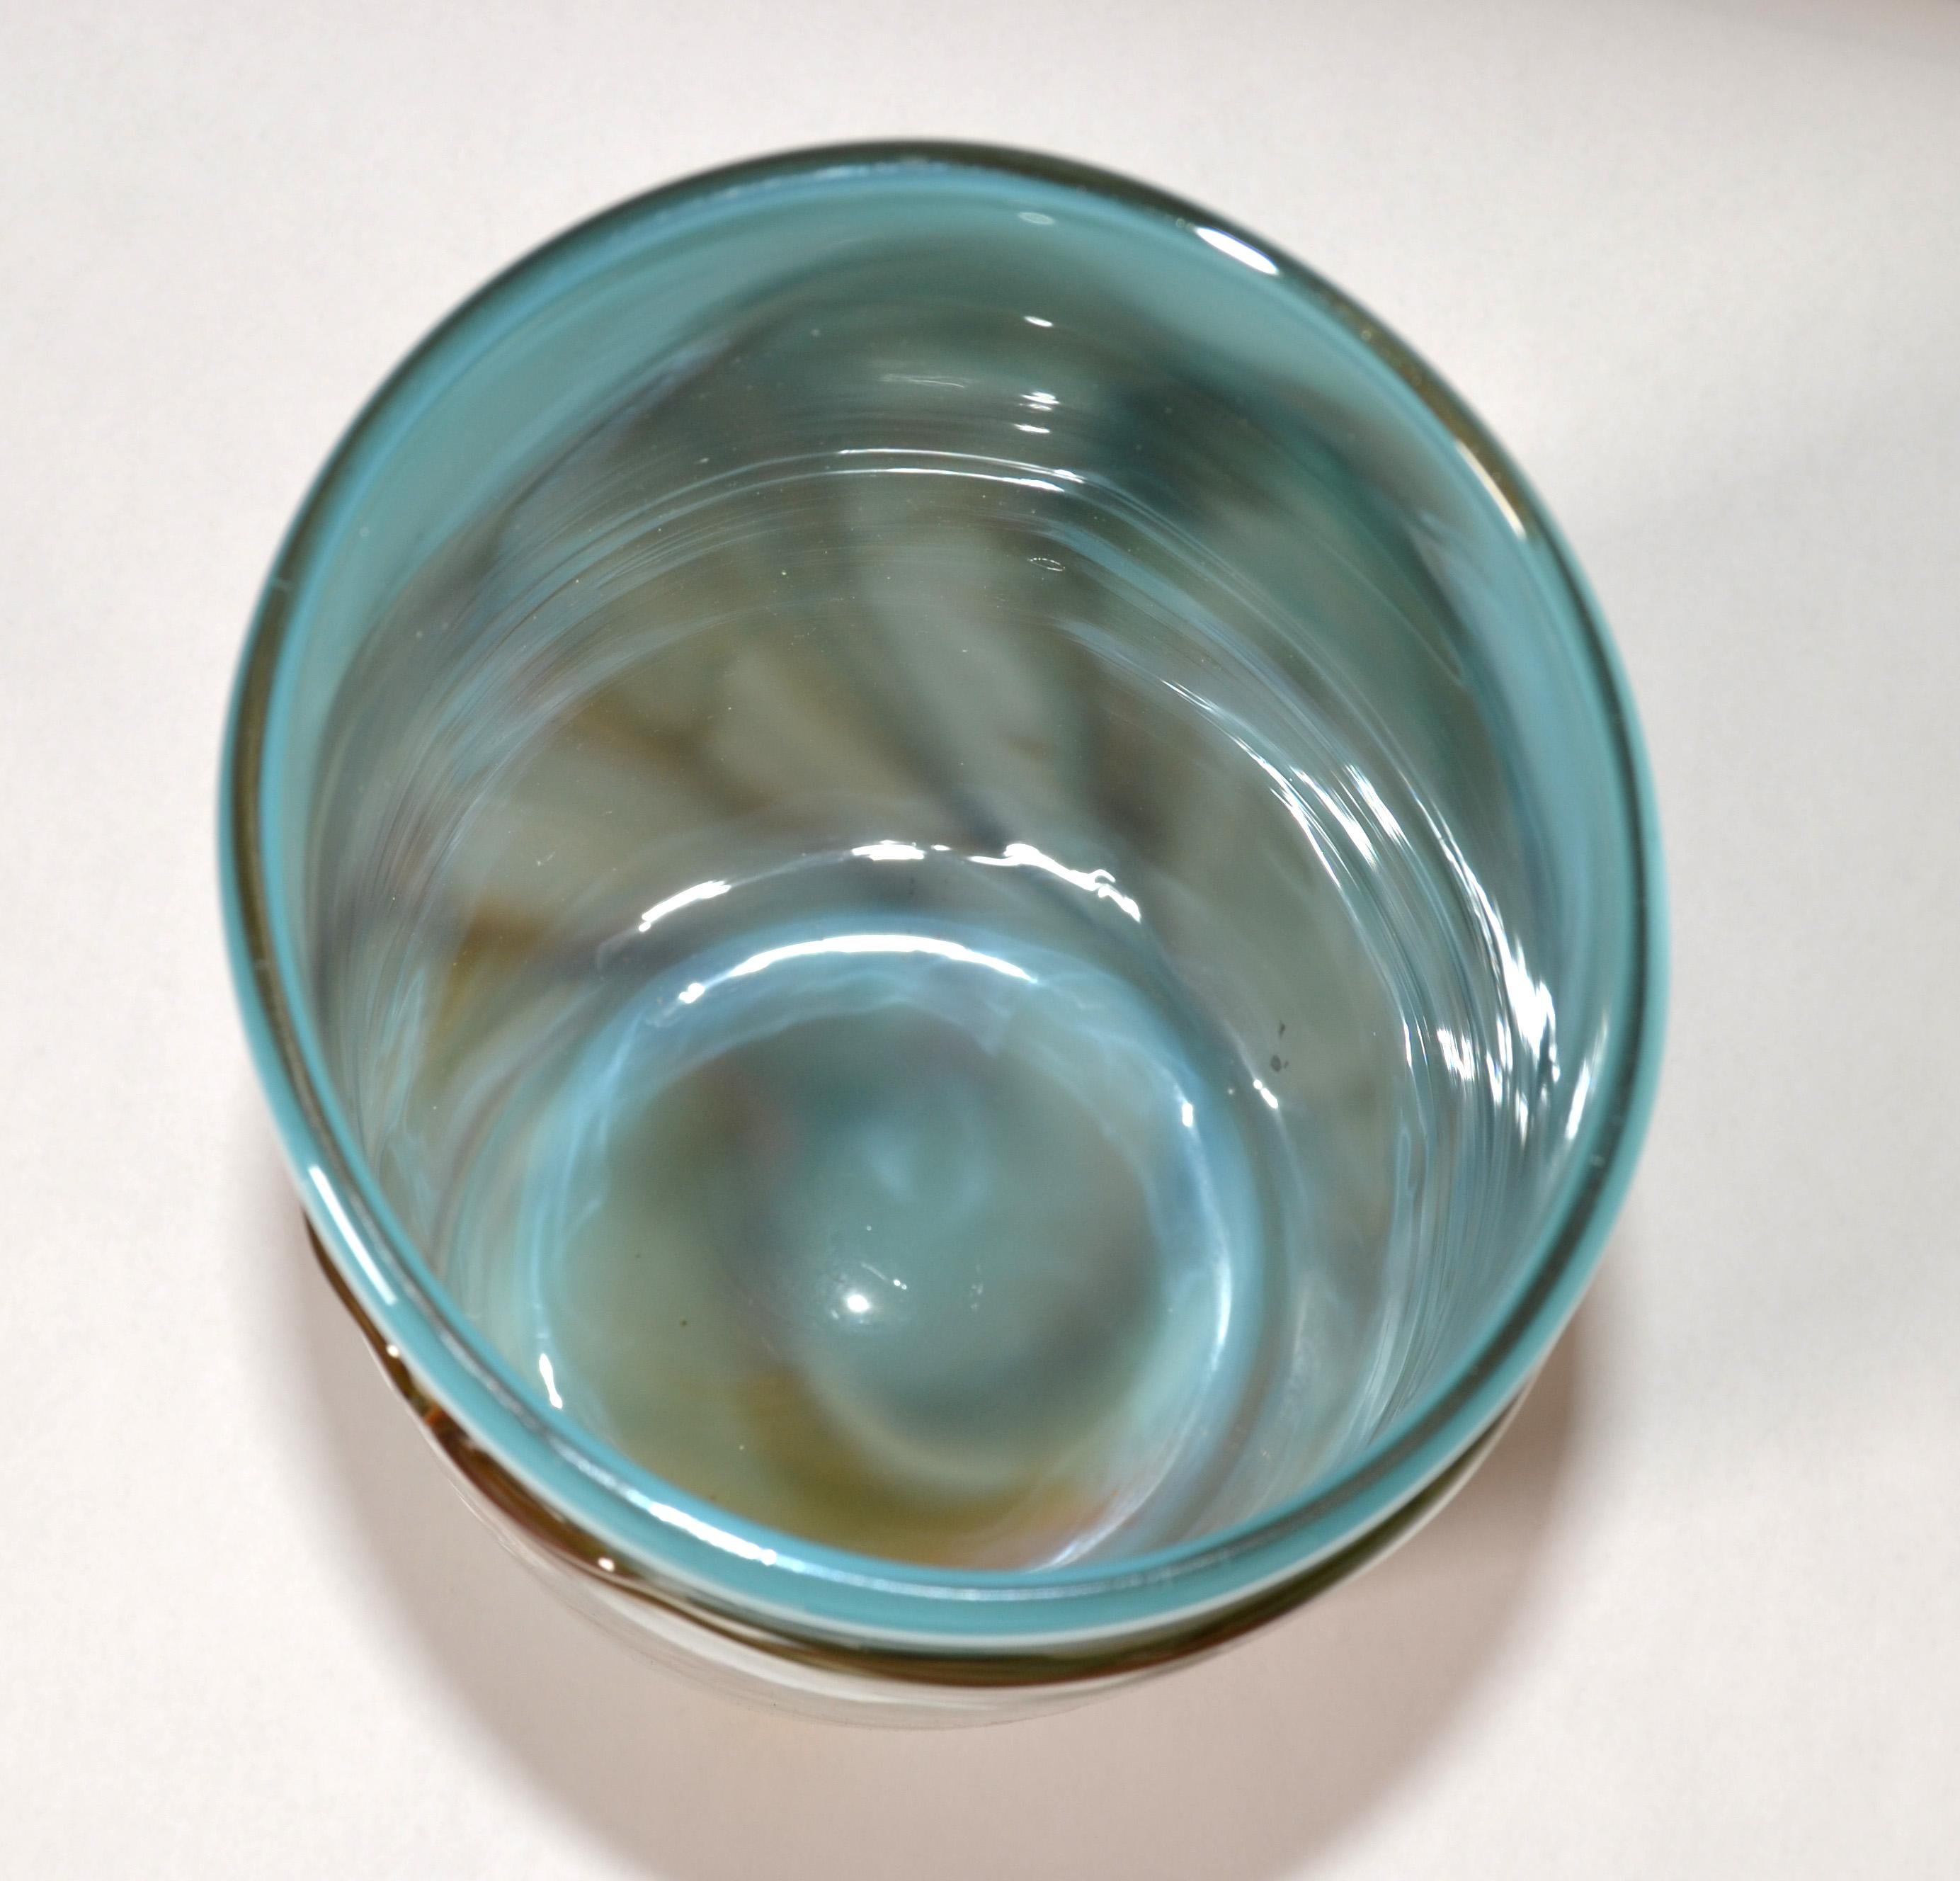 Vintage Studio Art Blown Glass Heavy Vase Vessel Turquoise and Hues Brown 1975 For Sale 4